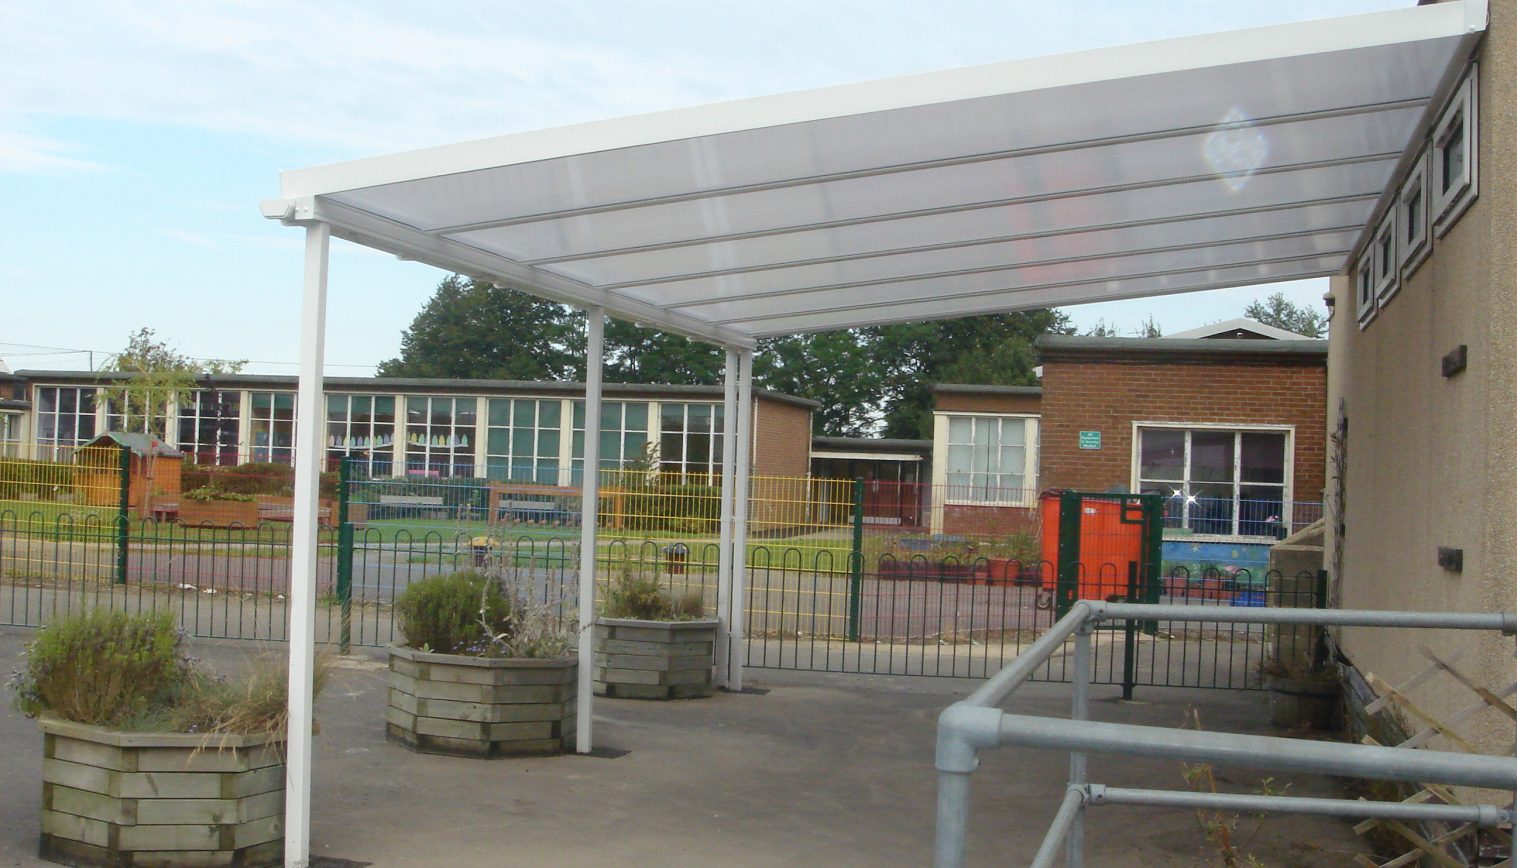 Penhill Primary School – Wall Mounted Canopy